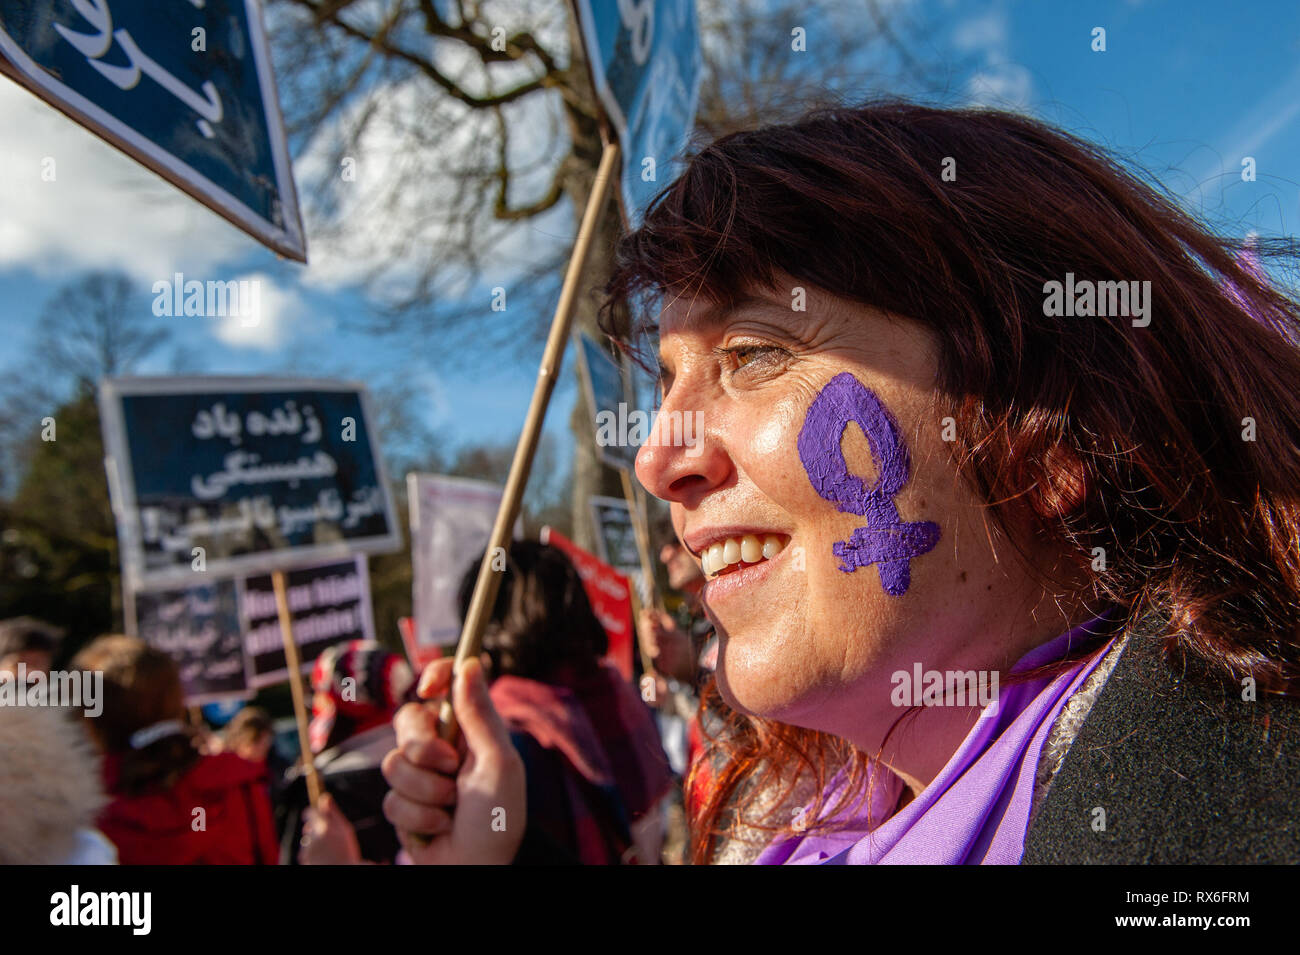 Brussels, North Brabant, Belgium. 8th Mar, 2019. A woman is seen wearing  the female symbol painting in her face during the protest.On the 40th  anniversary of the 5-days women's uprising against "compulsory